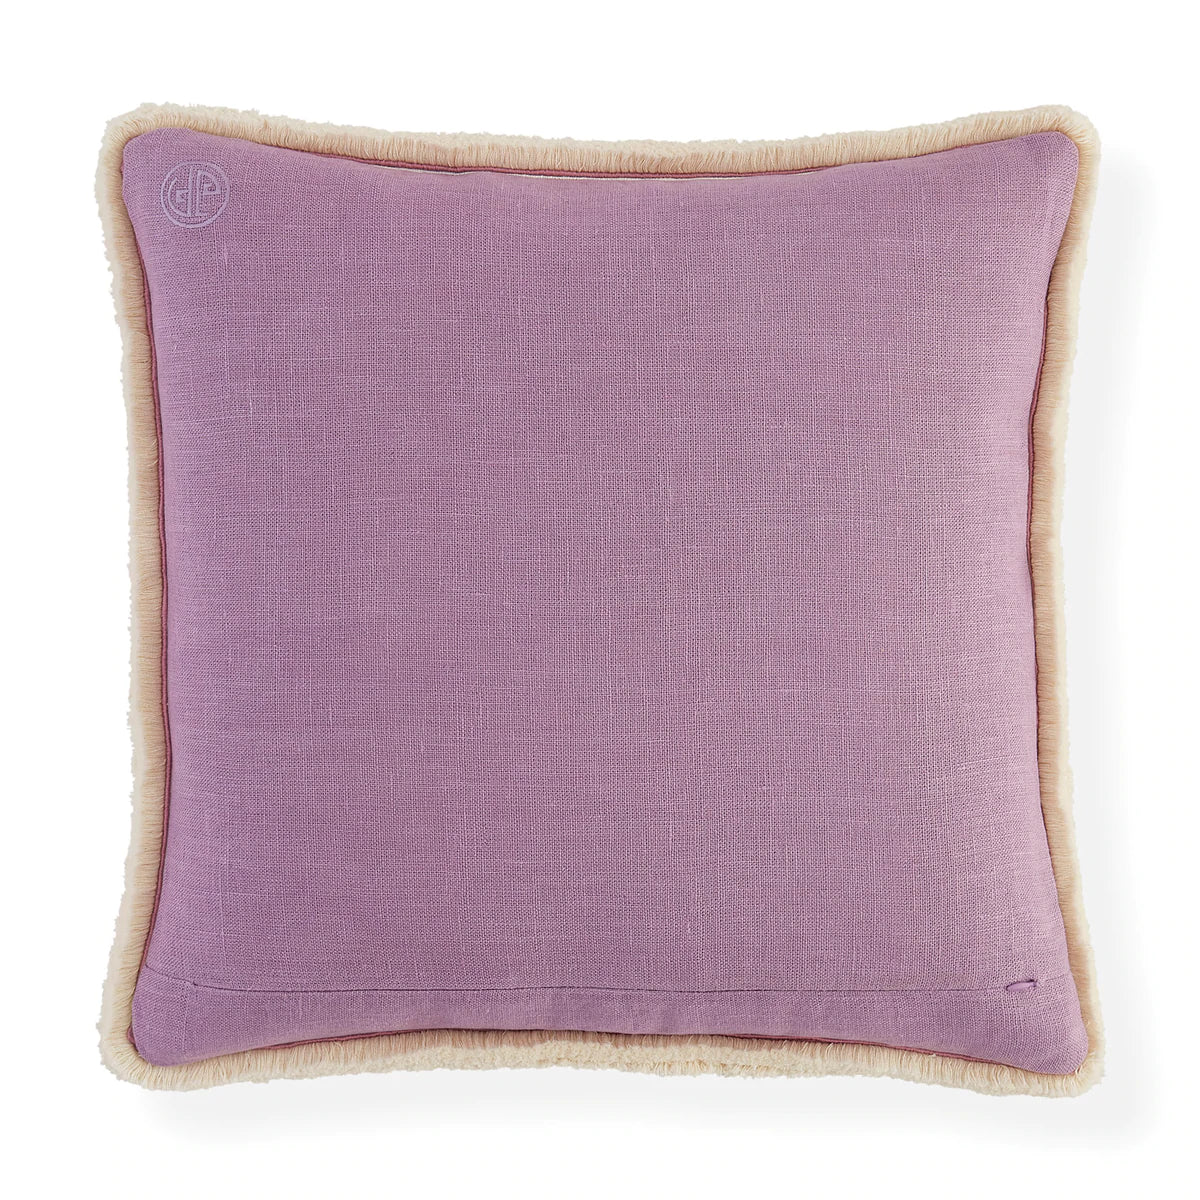 Scala Corded Square Pillow by Jonathan Adler